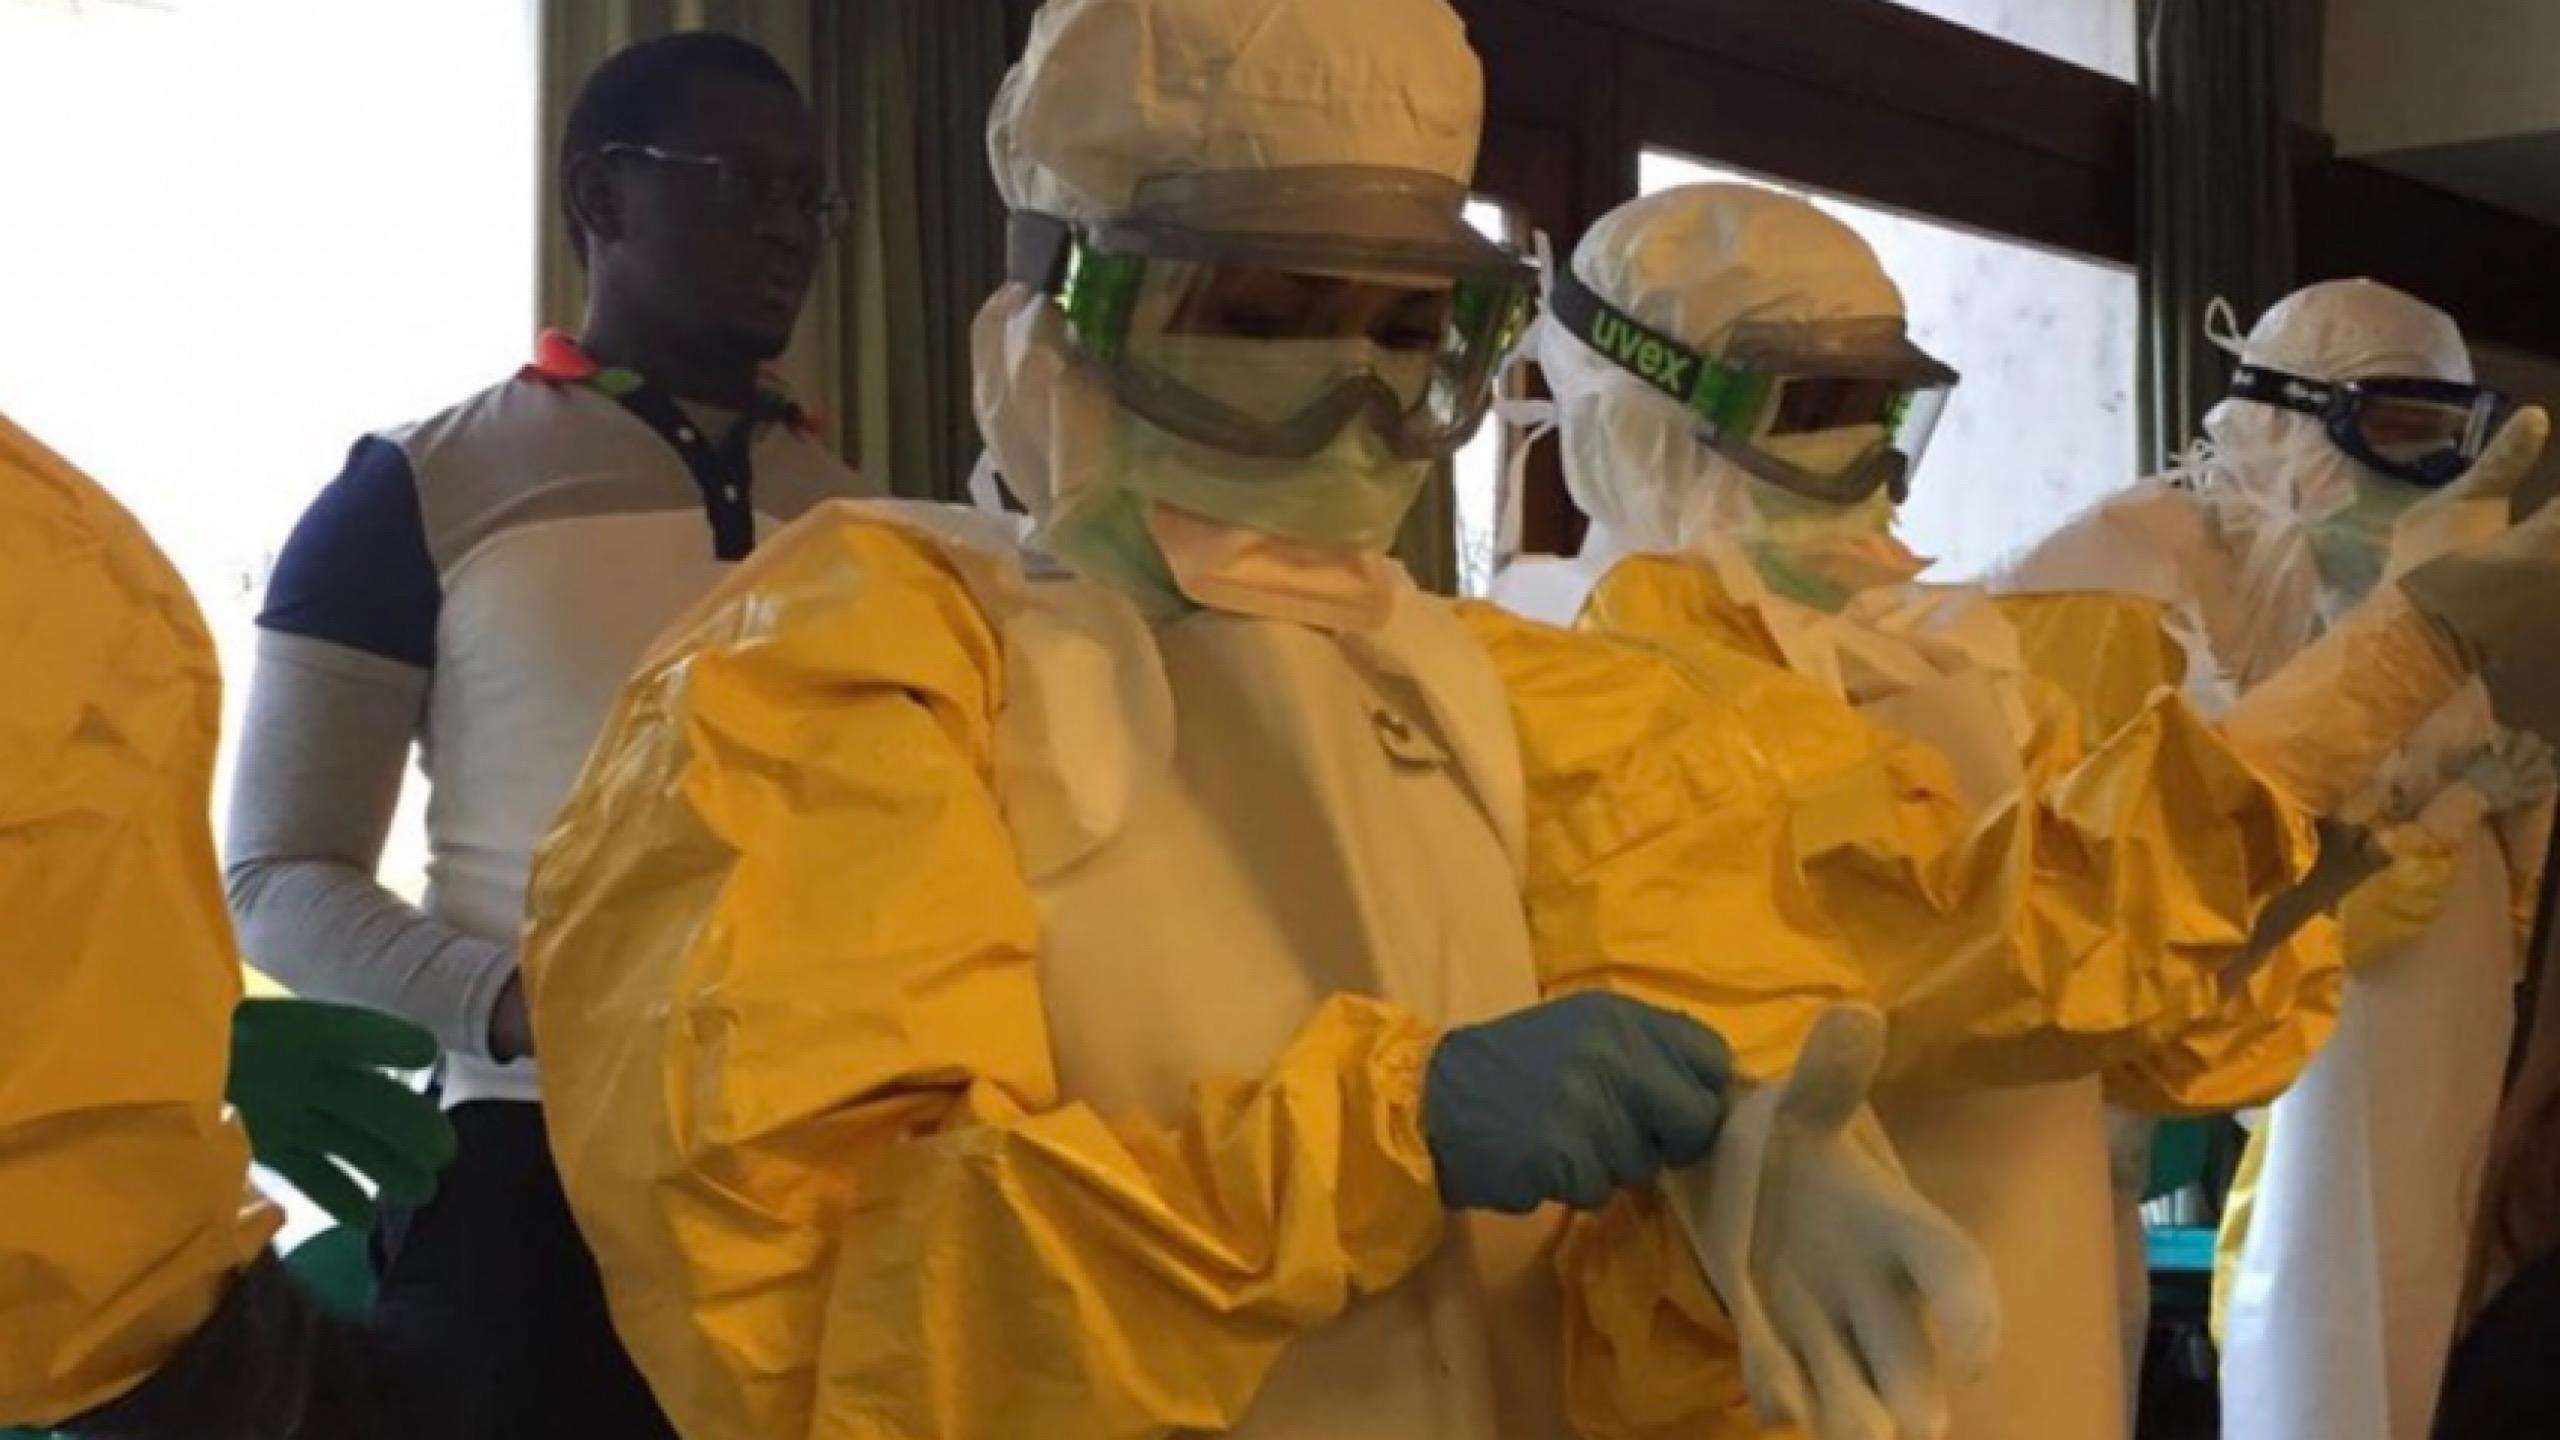 Nurse Valerie Gruhn trains for an assignment with the MSF Ebola response team